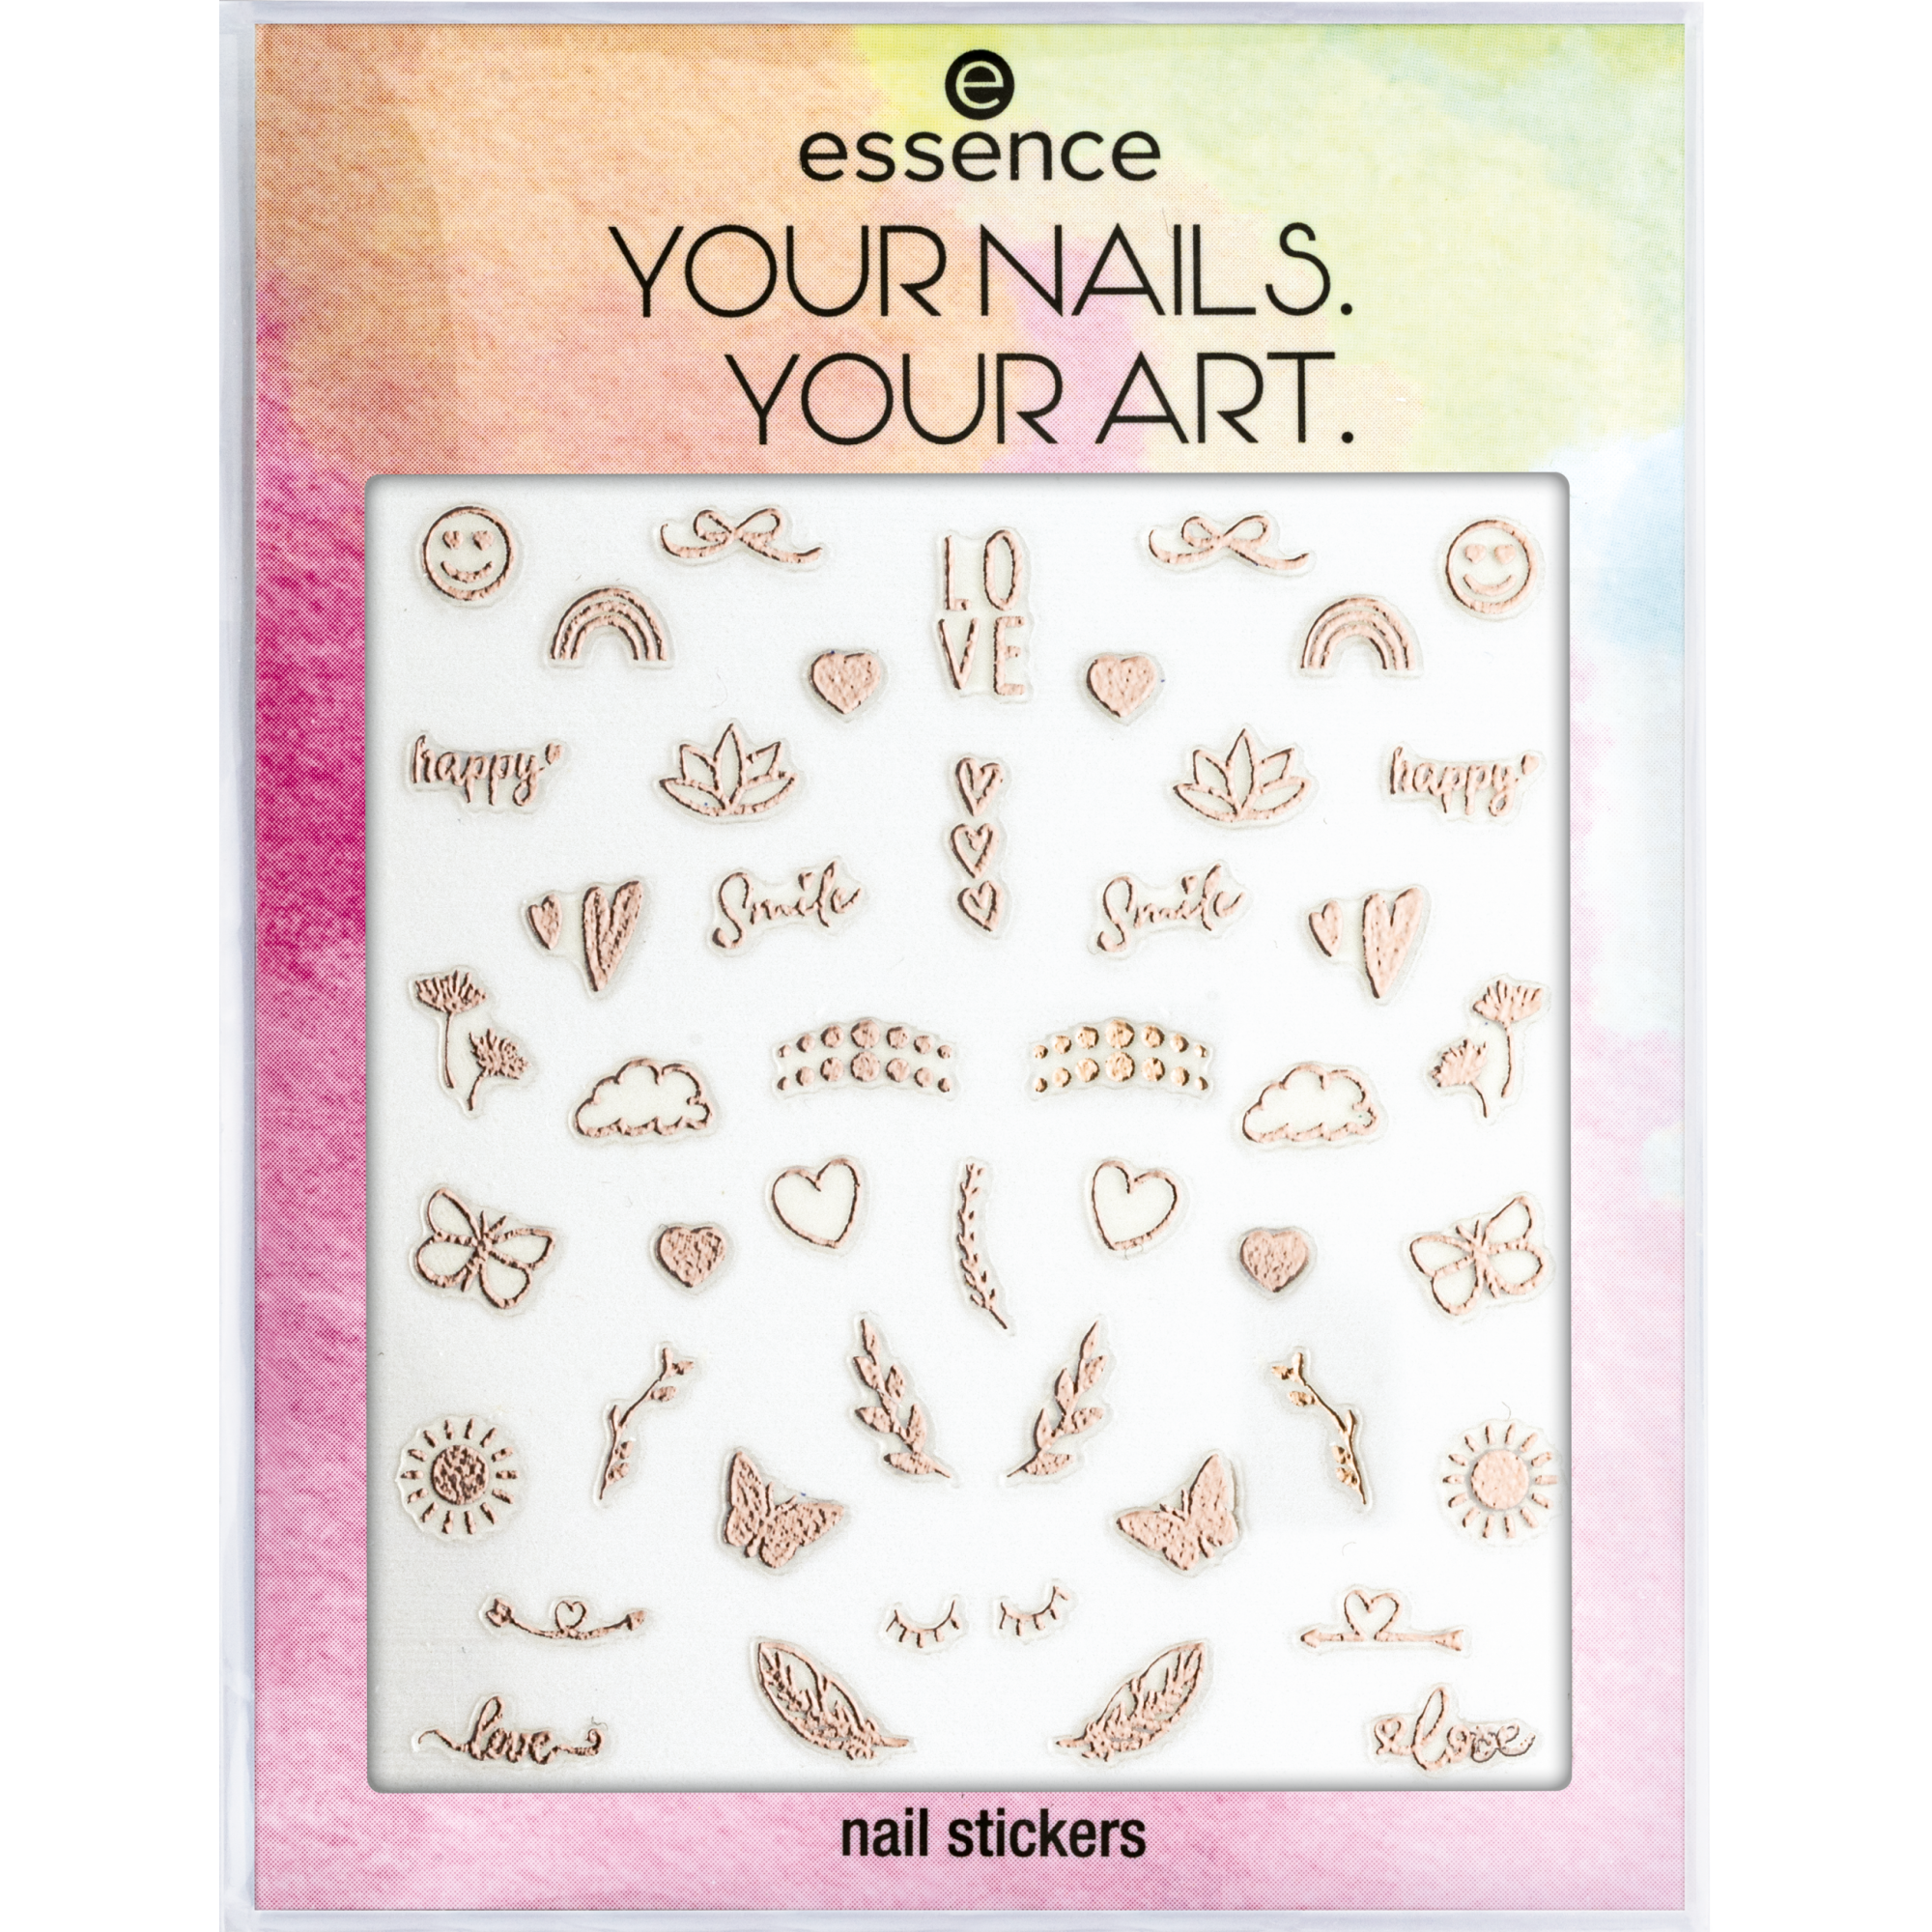 YOUR NAILS. YOUR ART. nail stickers